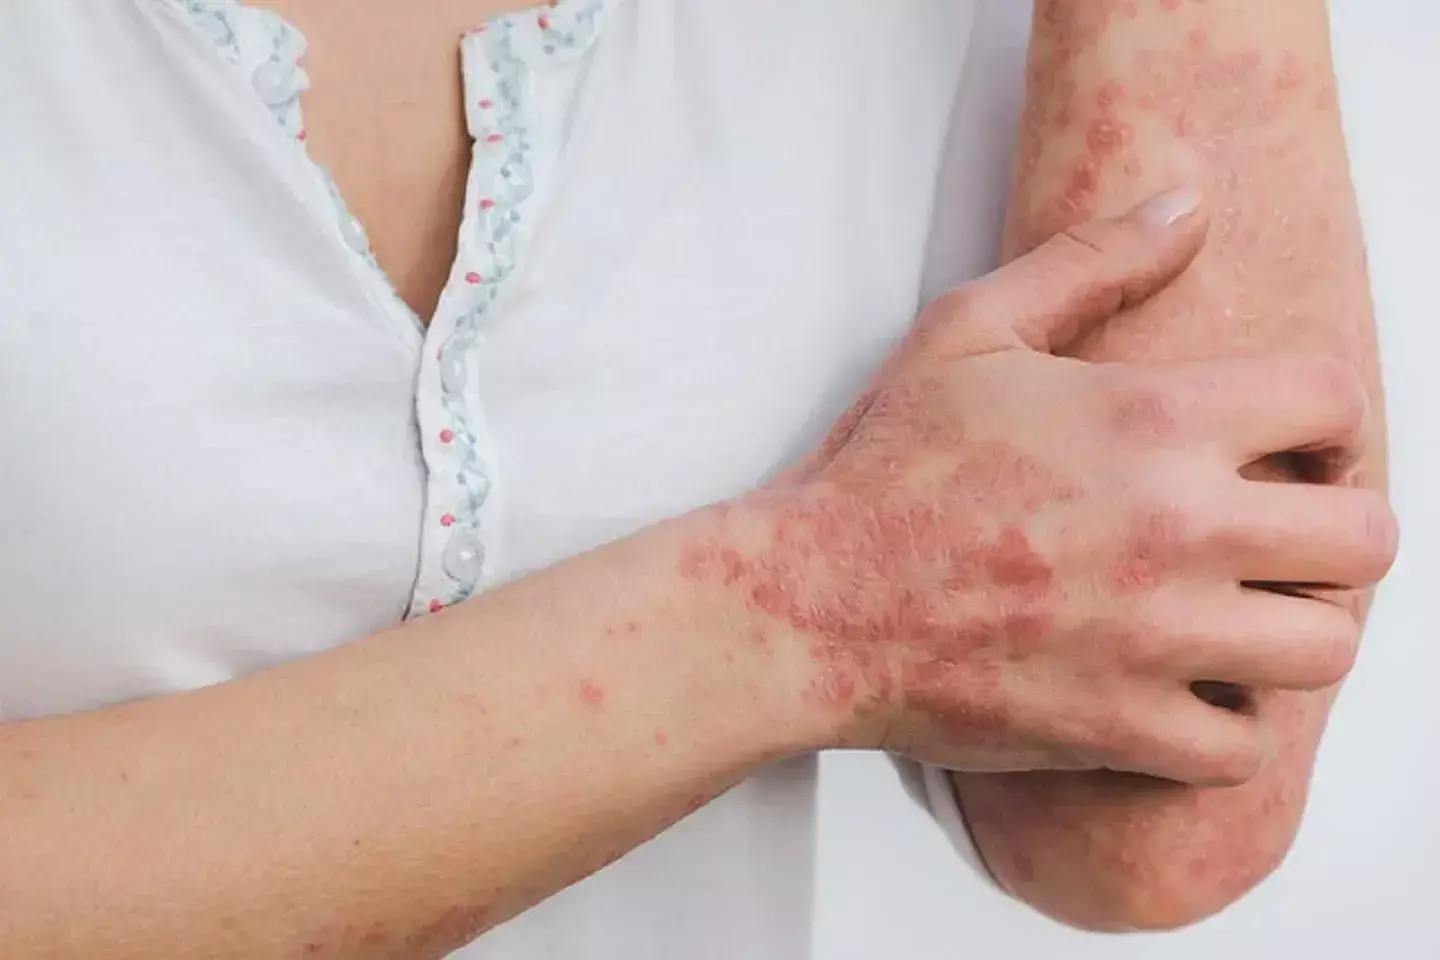 Piclidenoson efficacious and safe in the treatment of patients with plaque psoriasis: Study